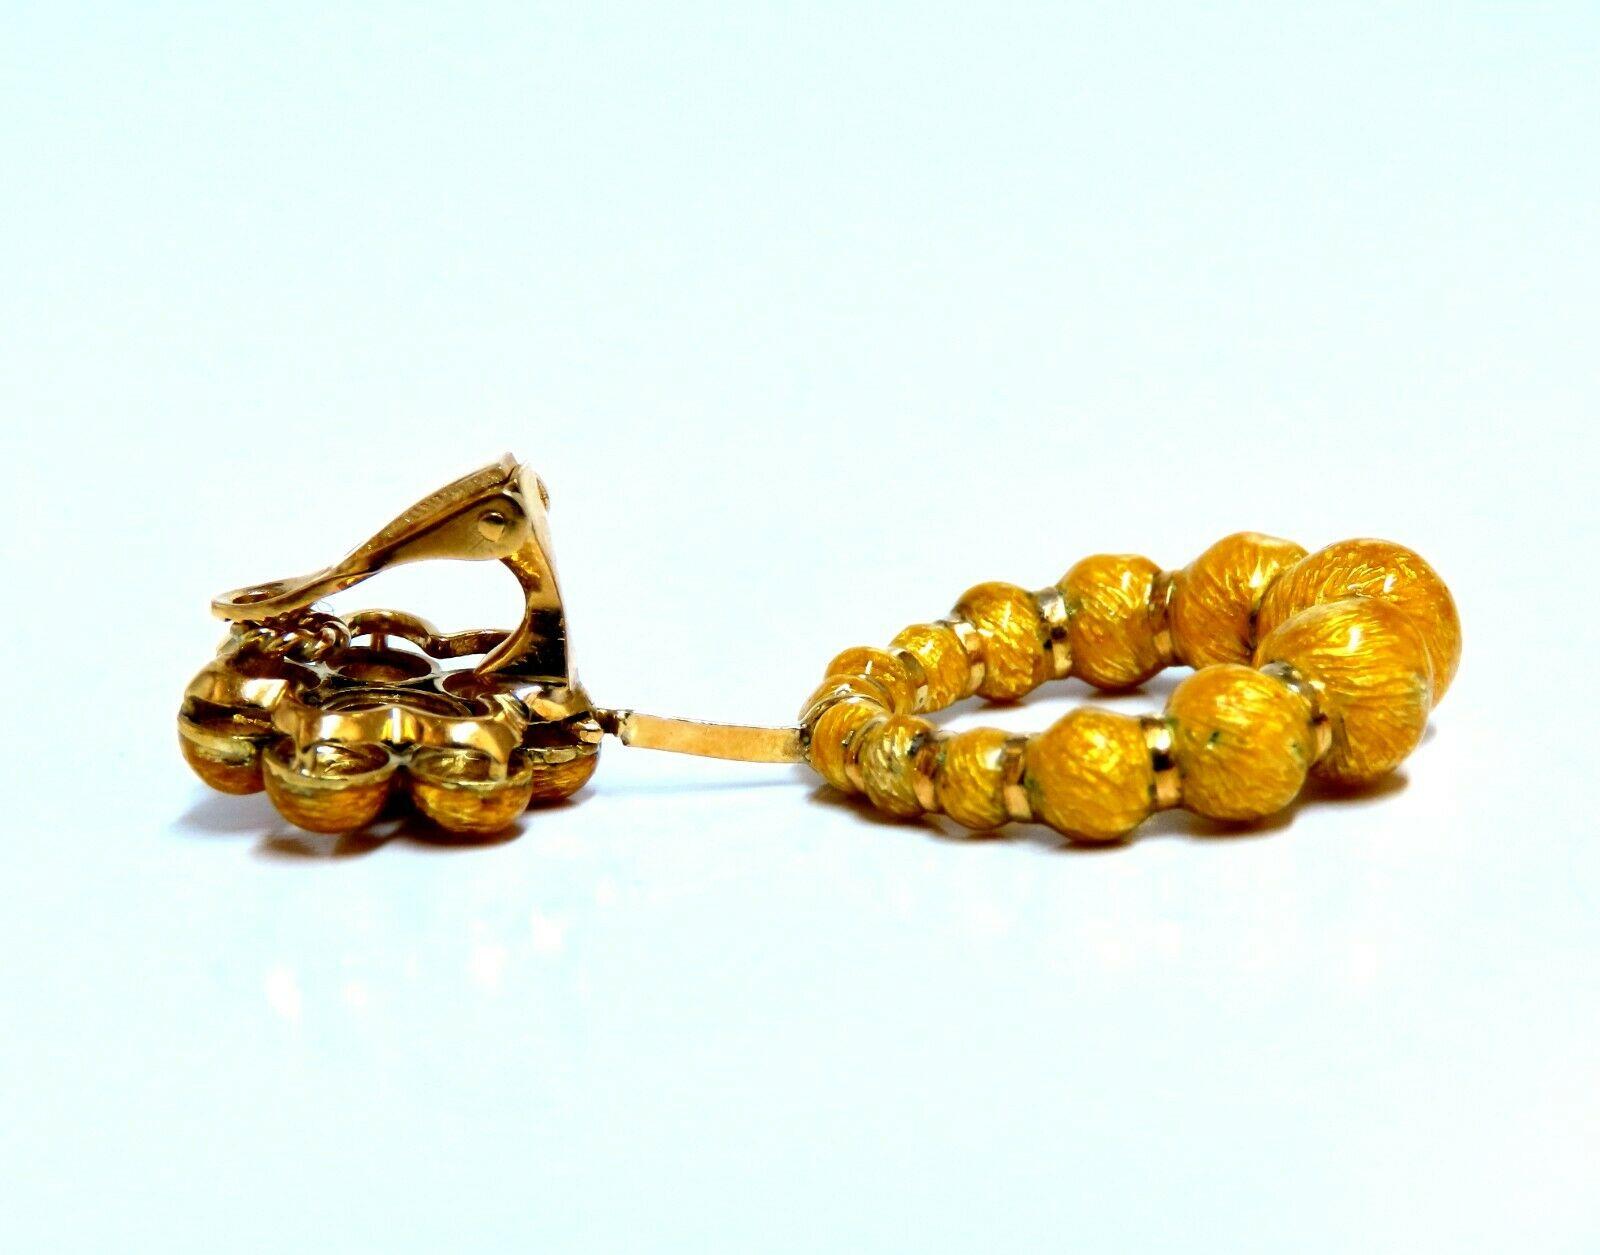 Yellow Enamel Cluster Large Bead Dangle earrings

Measurements of Earrings:

15.8mm diameter cluster (Upper)

24mm Diameter (Larger Circle)

1.85 inch long

28.7 grams / 18kt. yellow gold

Postless clips

Earrings are gorgeous made